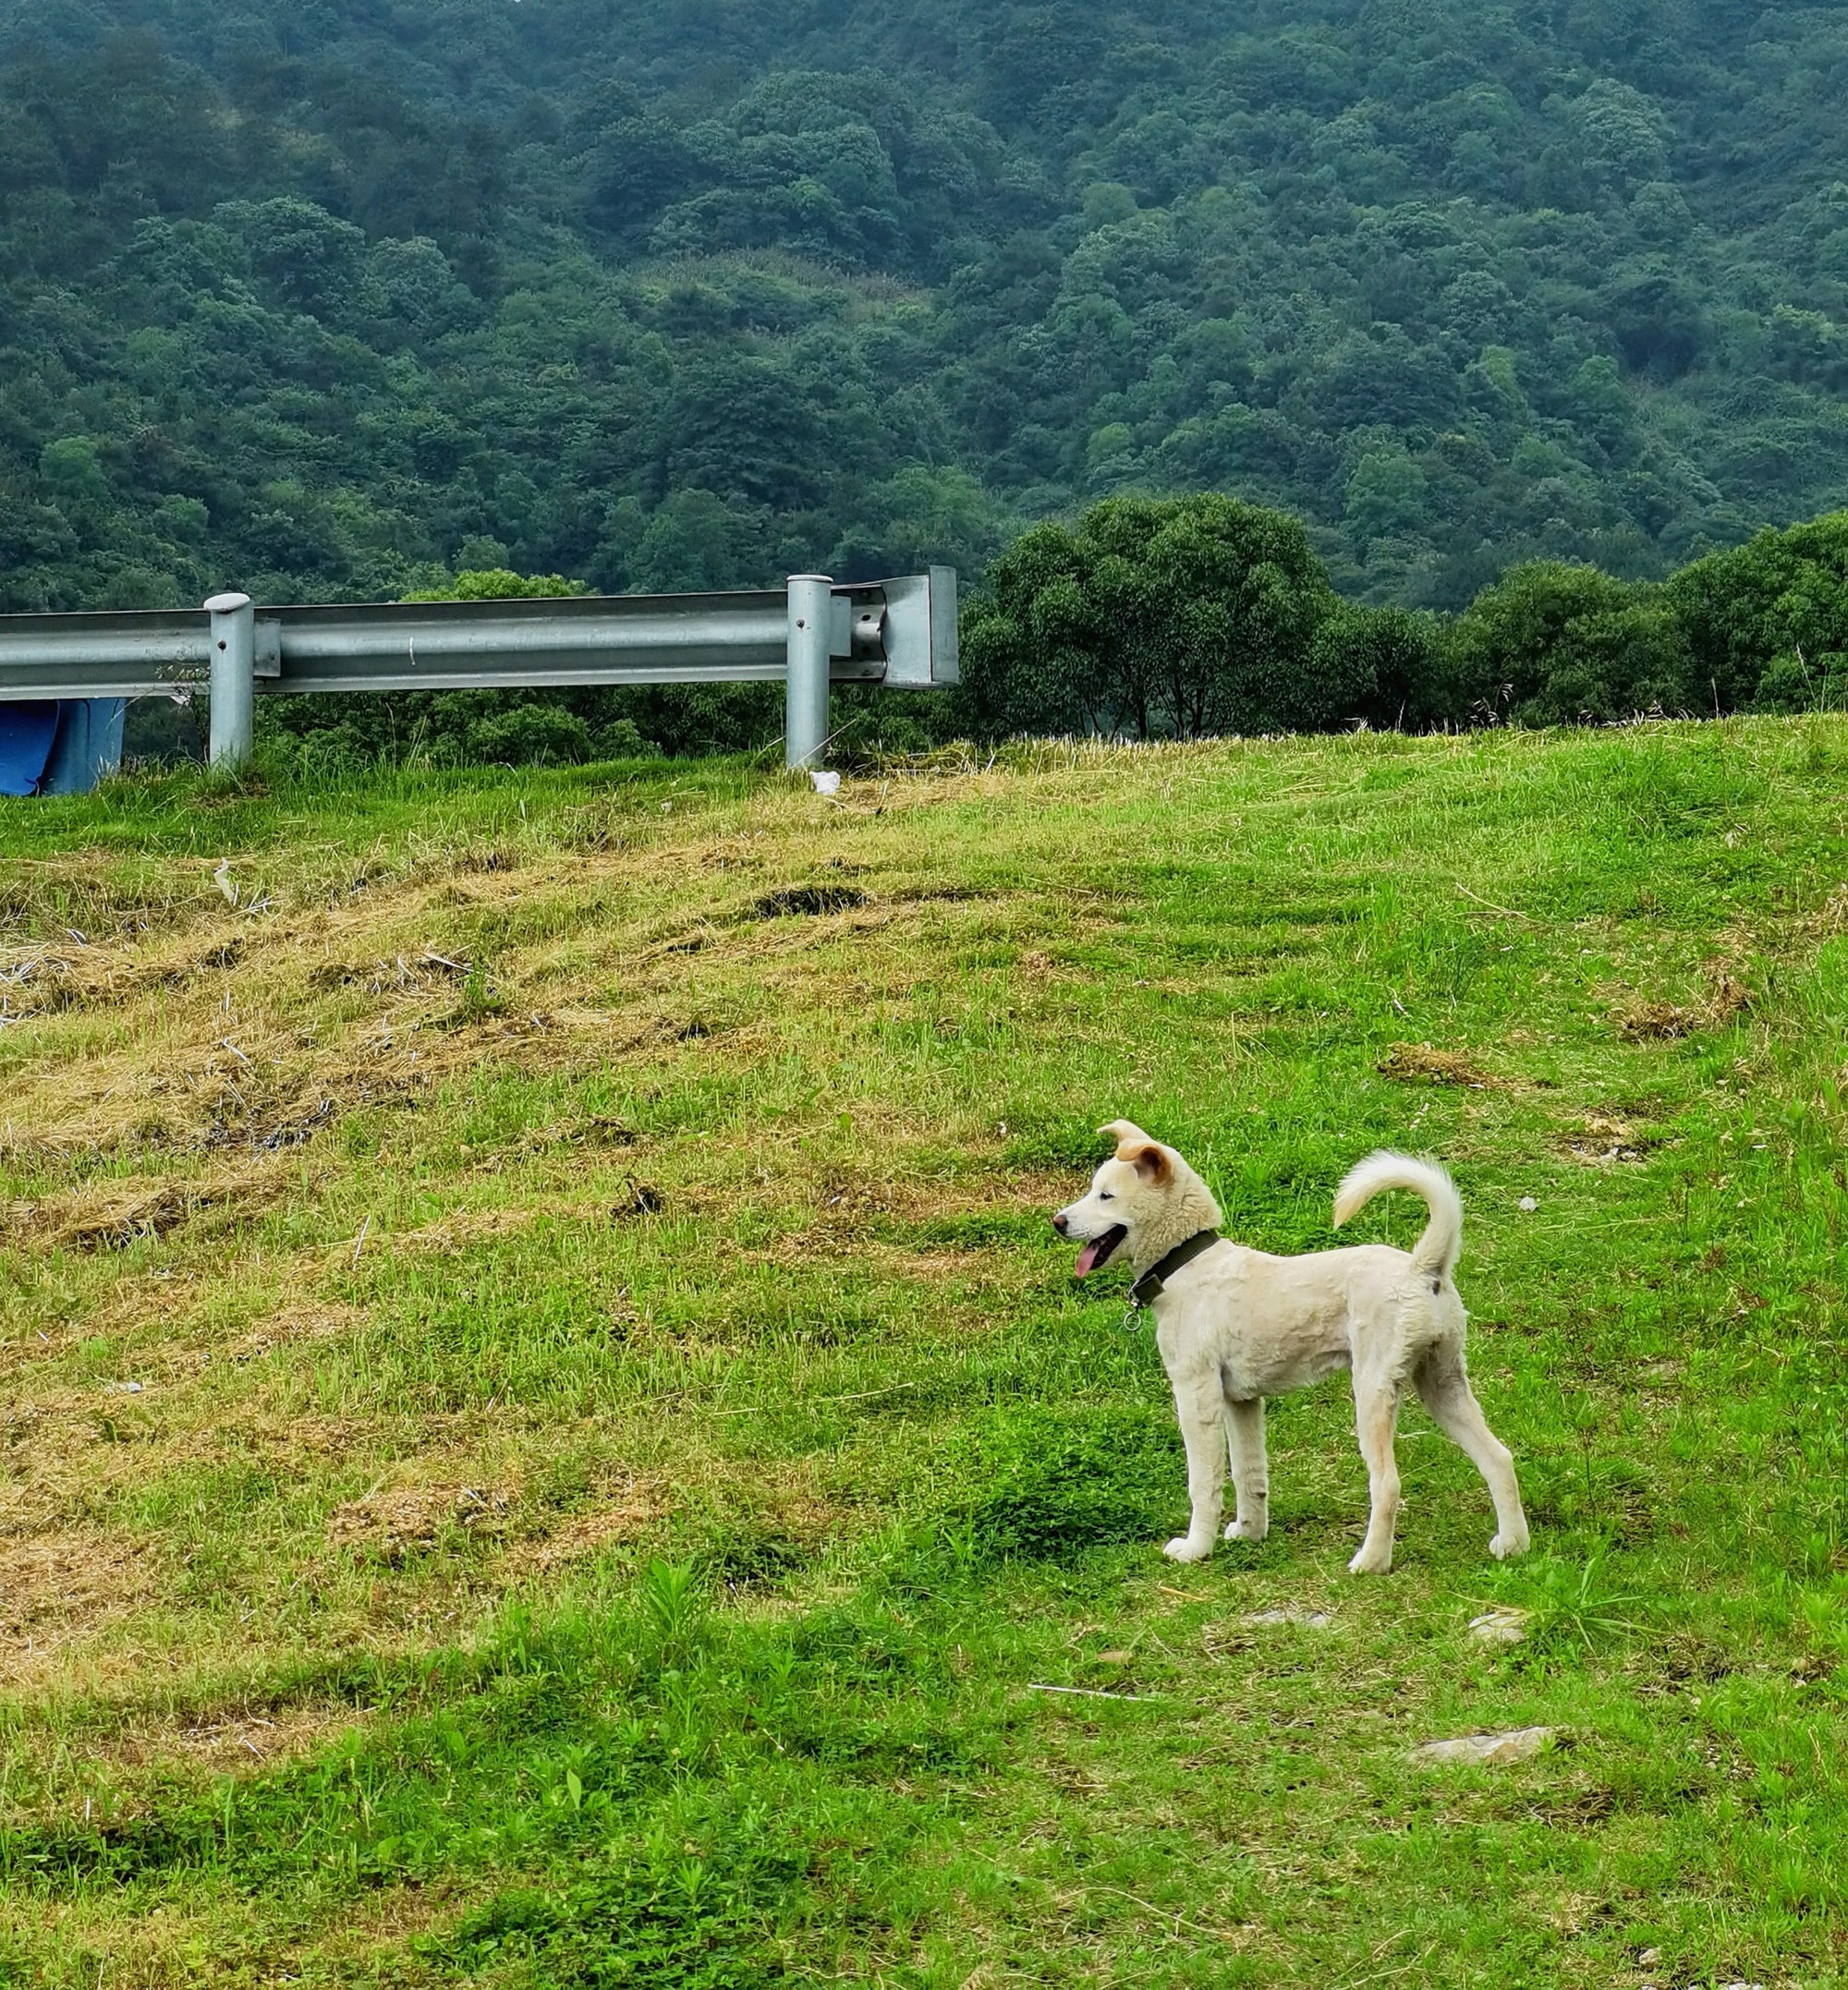 White dog standing on a hill near a road guardrail